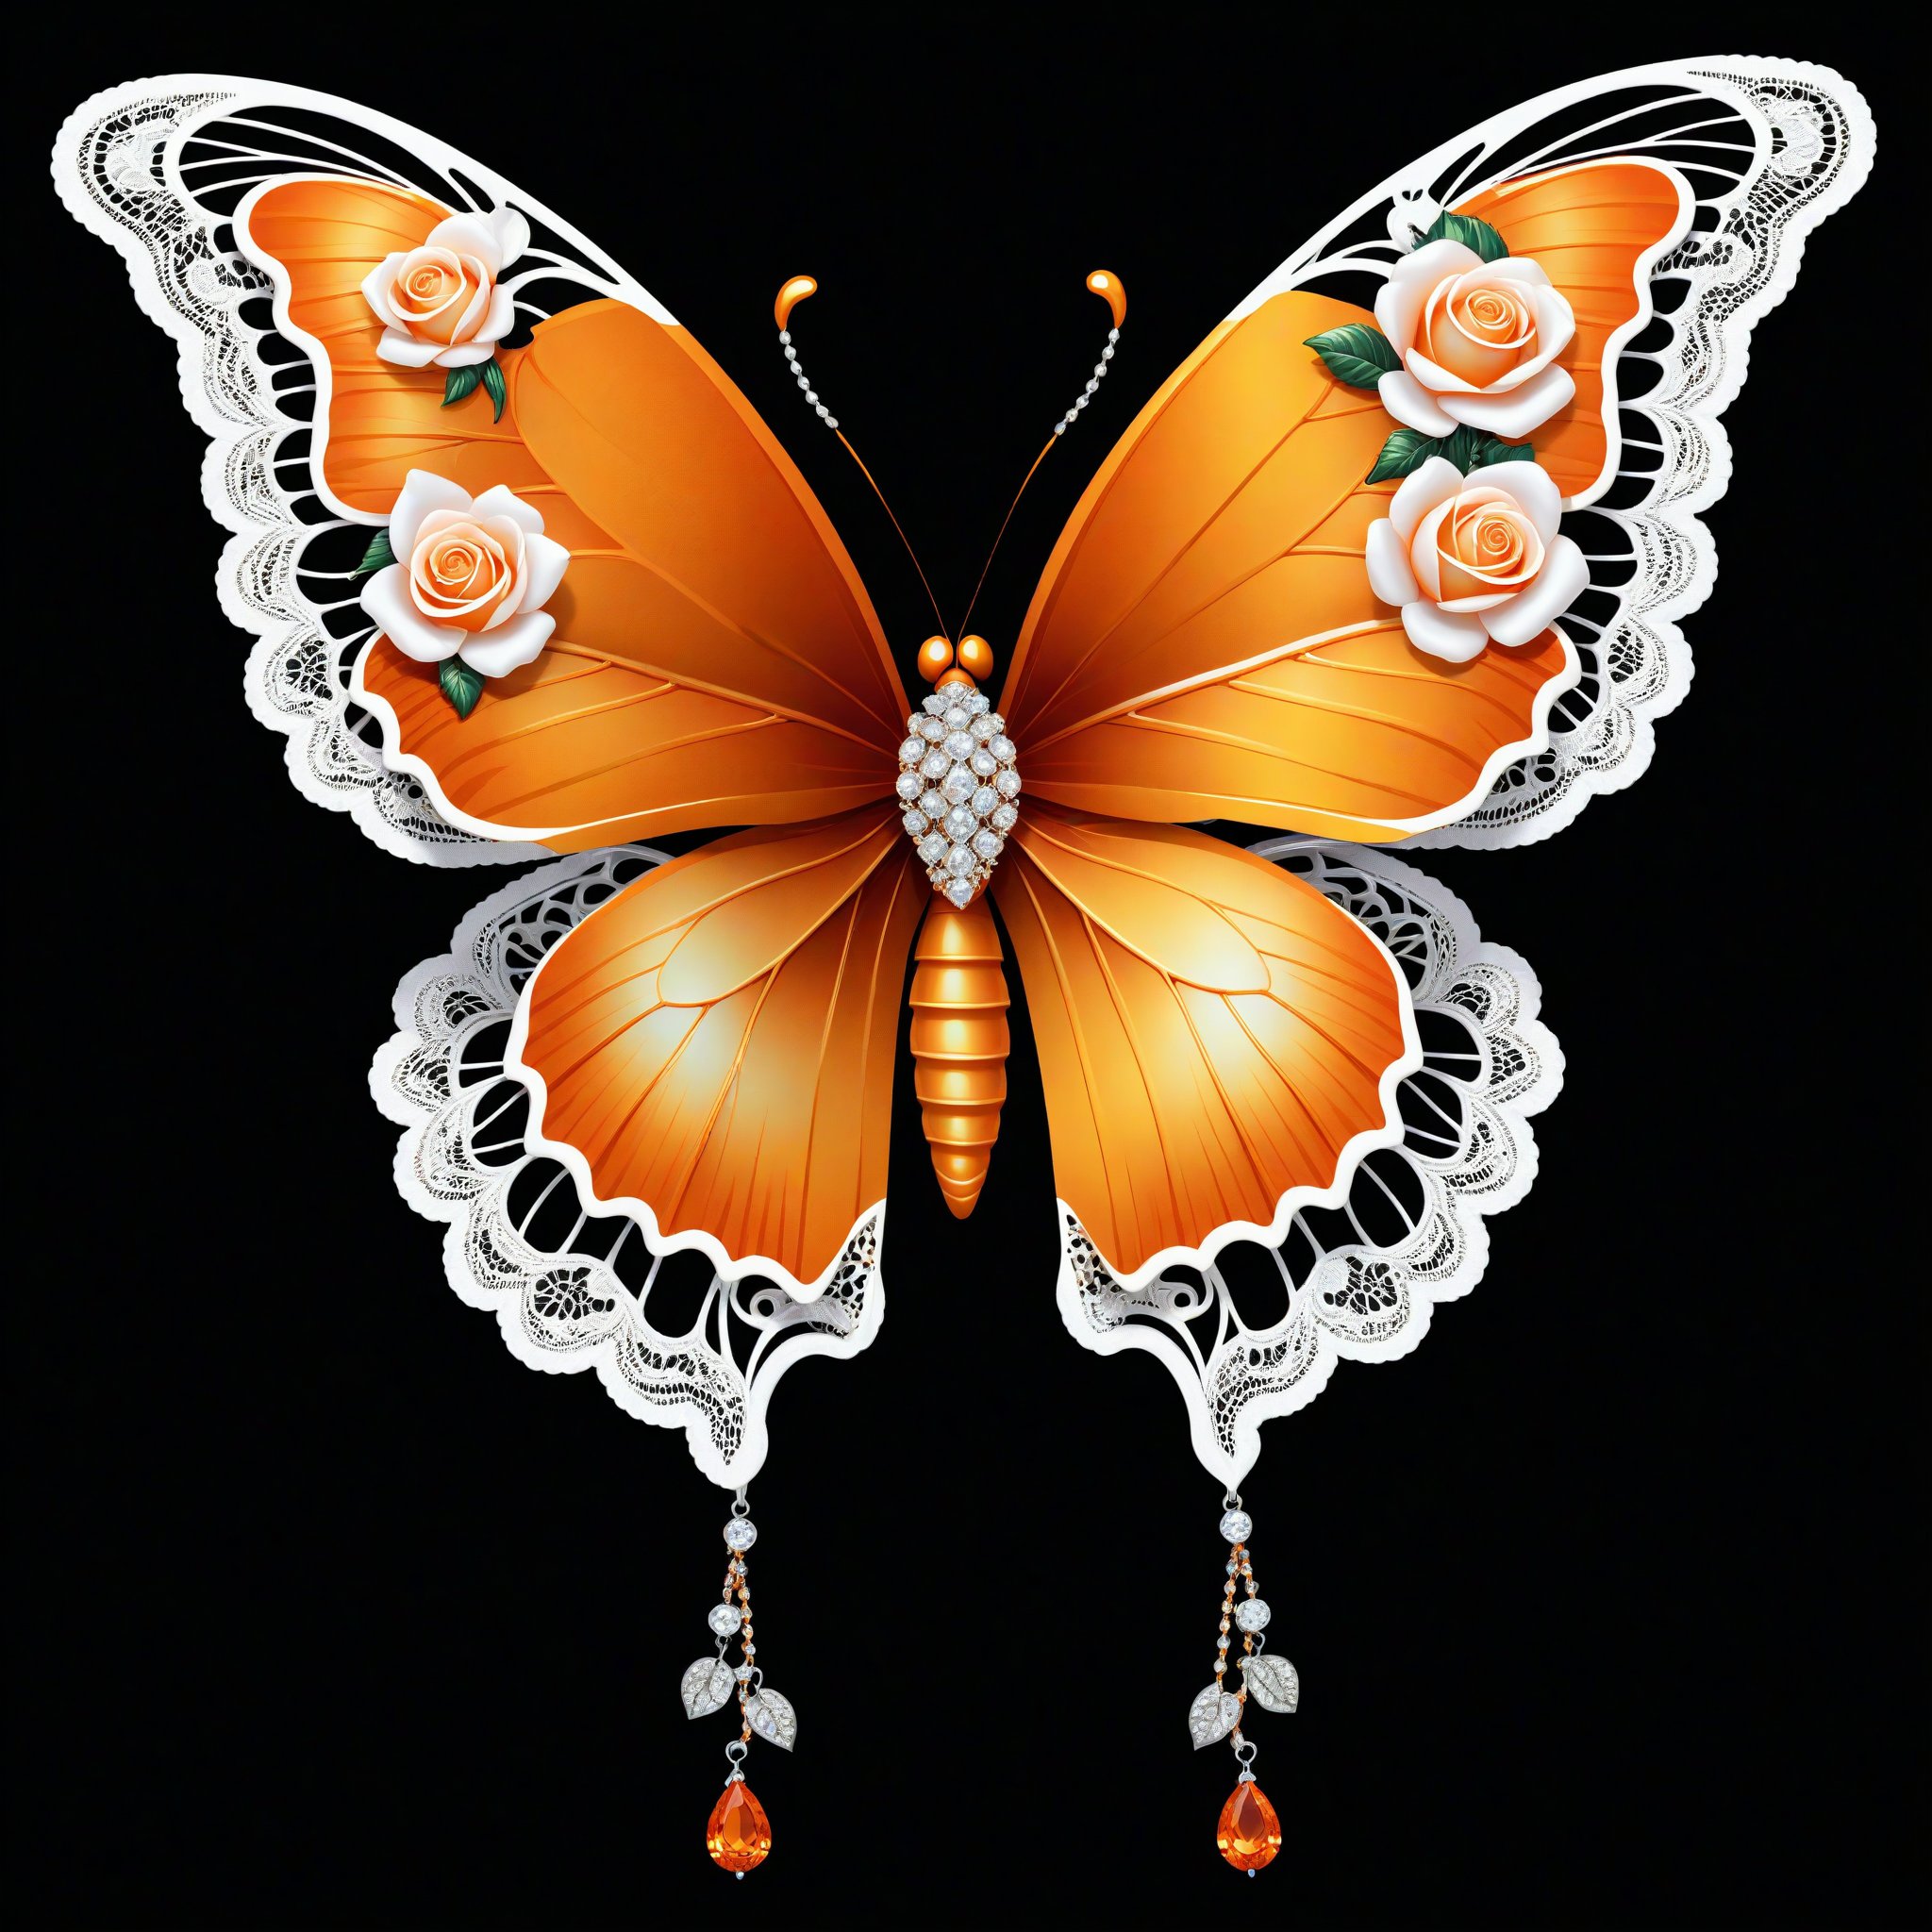 a butterfly iridicent orange whit lace bows roses elegant, with jewerlly epic decoration, clasic ornament Mechanical lines Elegance T-shirt design, BLACK BACKGROUND